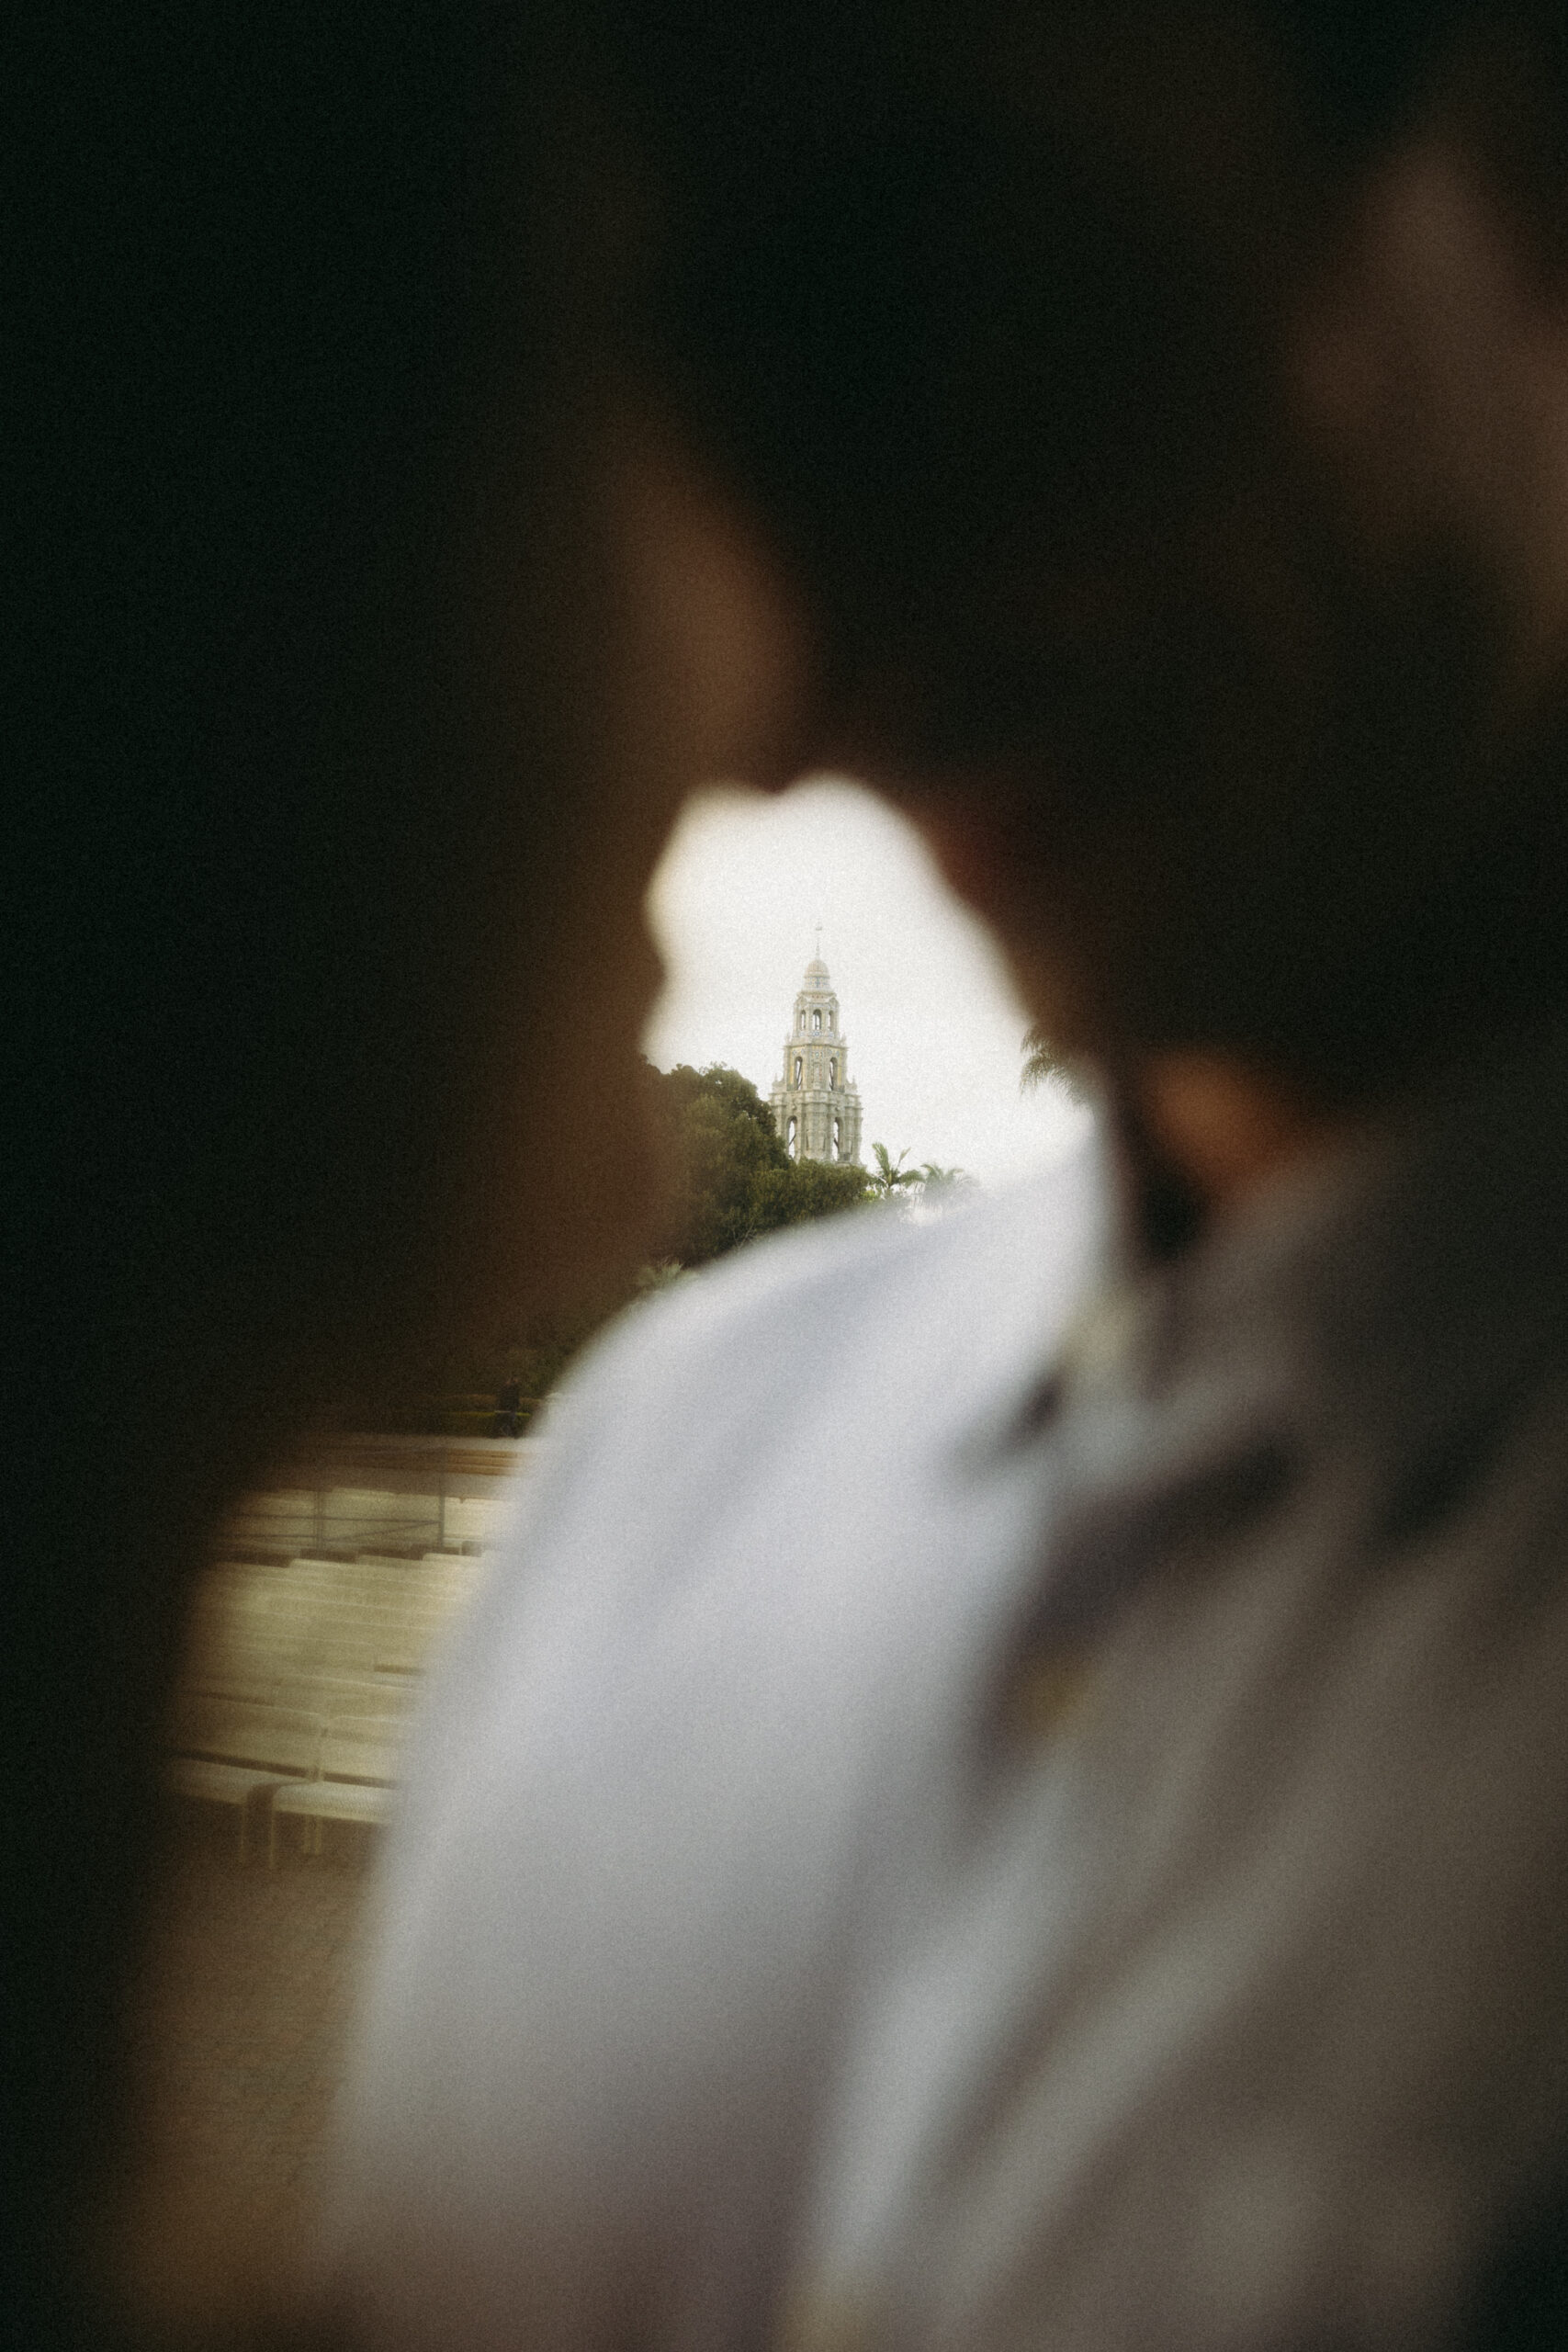 out of focus silhouette of couple at Balboa Park featuring California Tower